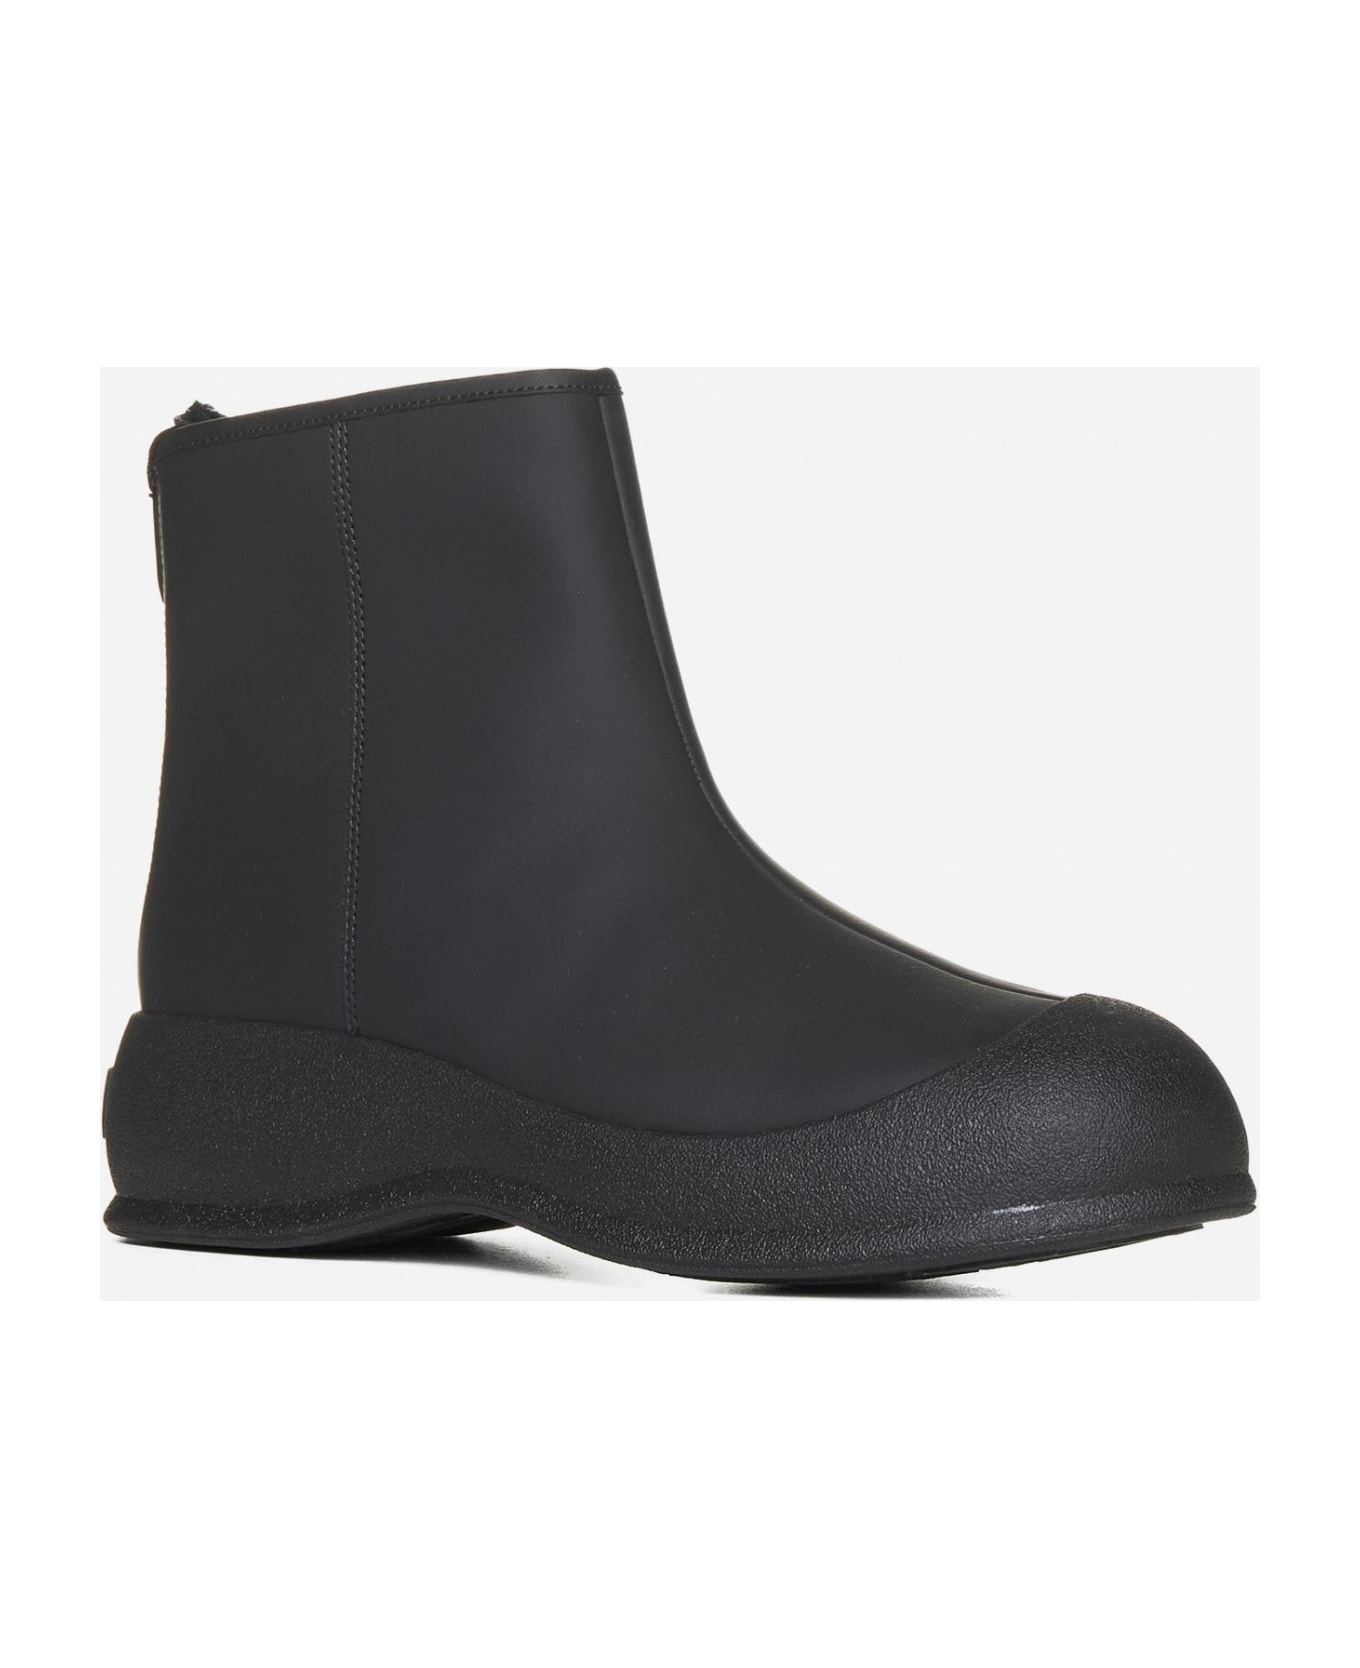 Bally Carsey Coated Leather Ankle Boots - Black